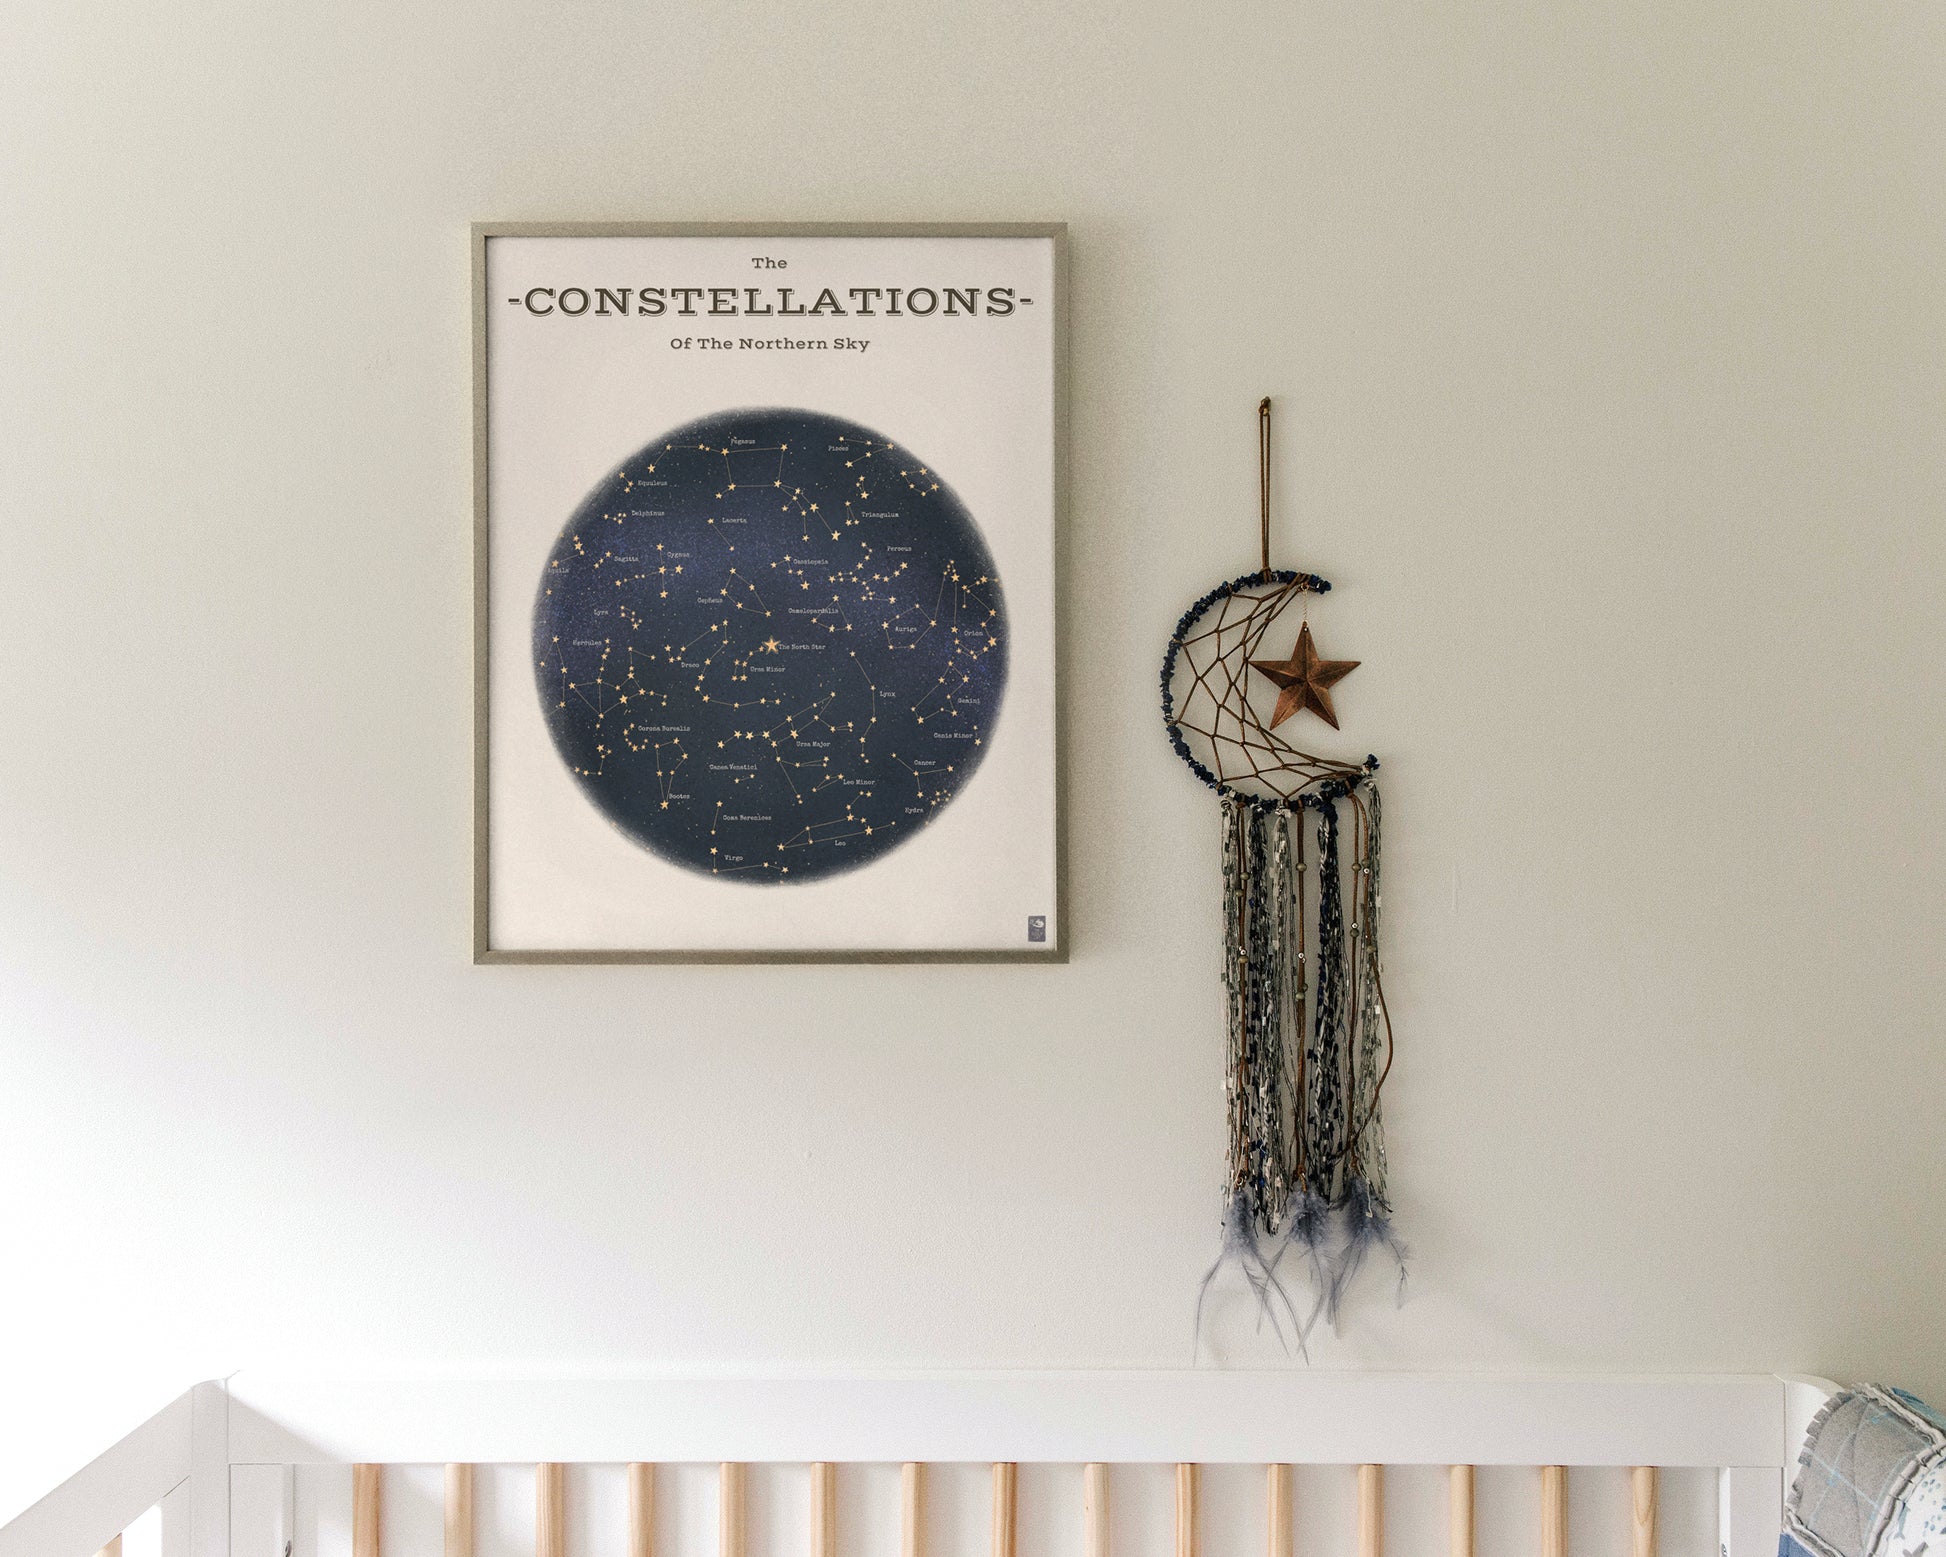 "The Constellations of the Northern Hemisphere" by Catherine Hébert - Astronomy Star Chart Giclee Art Print